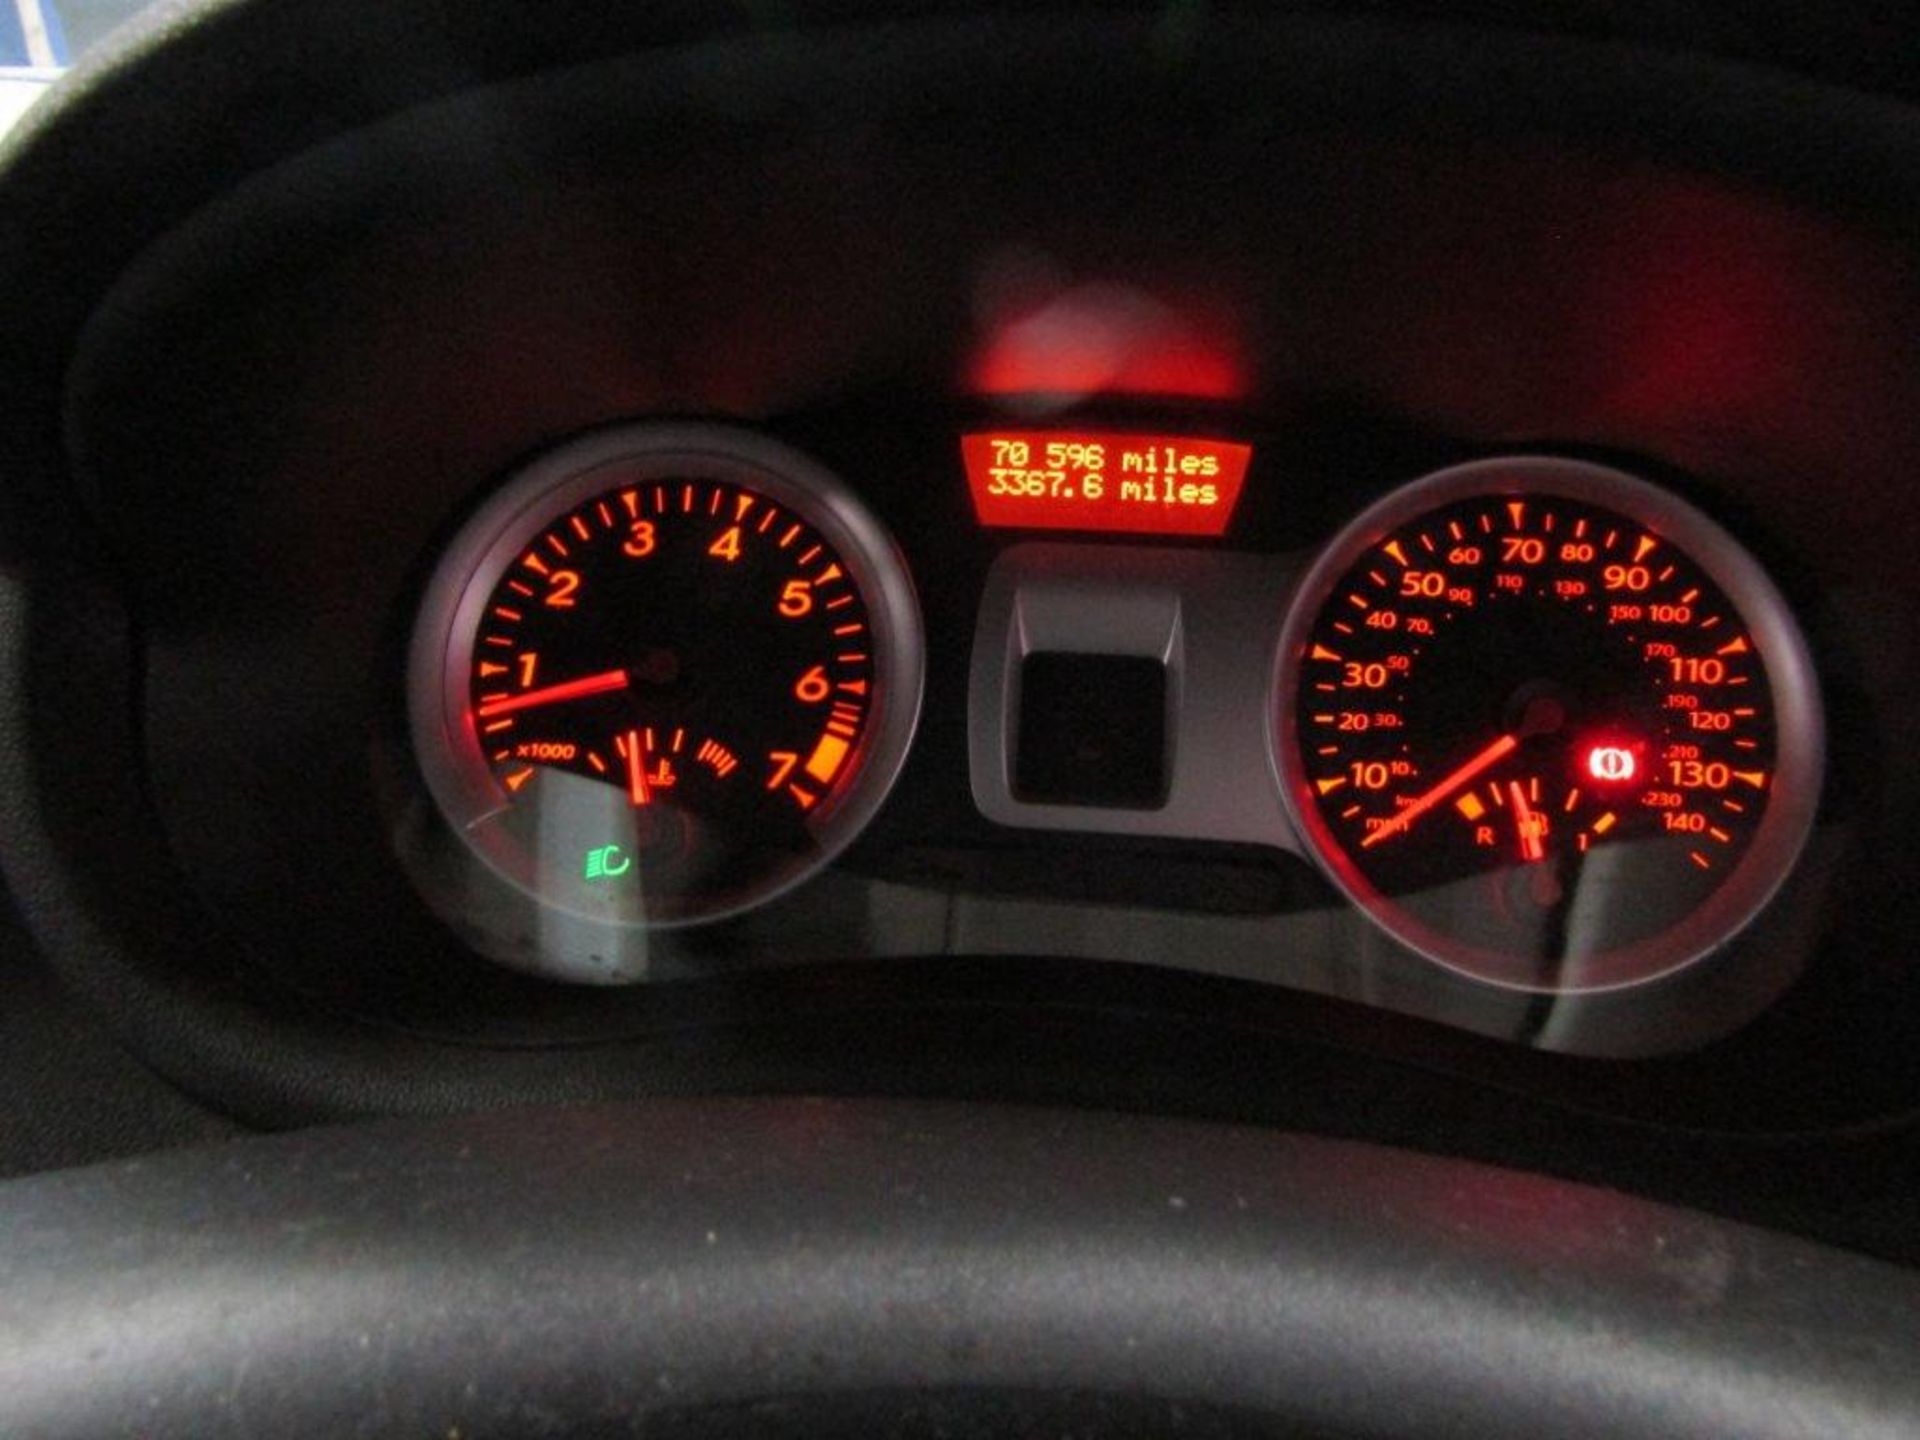 62 12 Renault Clio Dyn Tomtom - Image 23 of 23